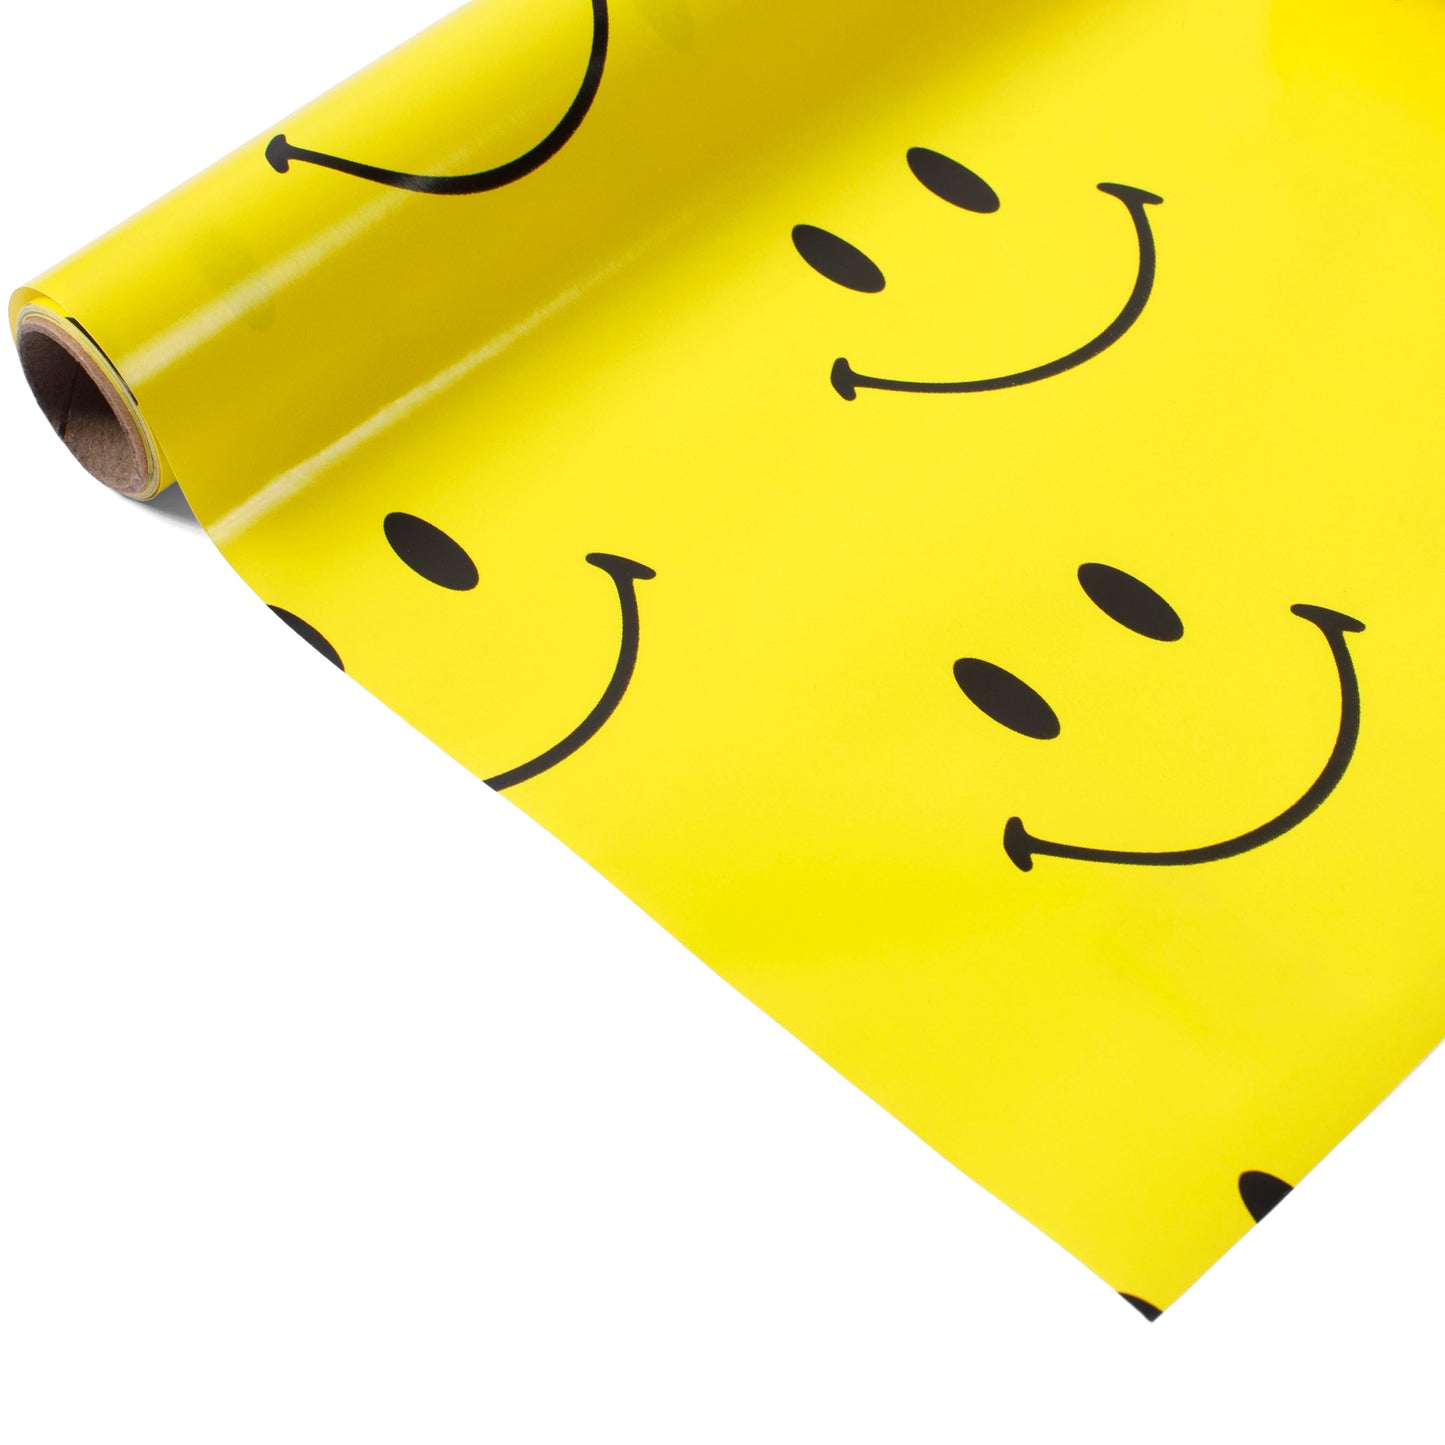 SMILEY GIFT WRAPPING PAPER 3 PACK